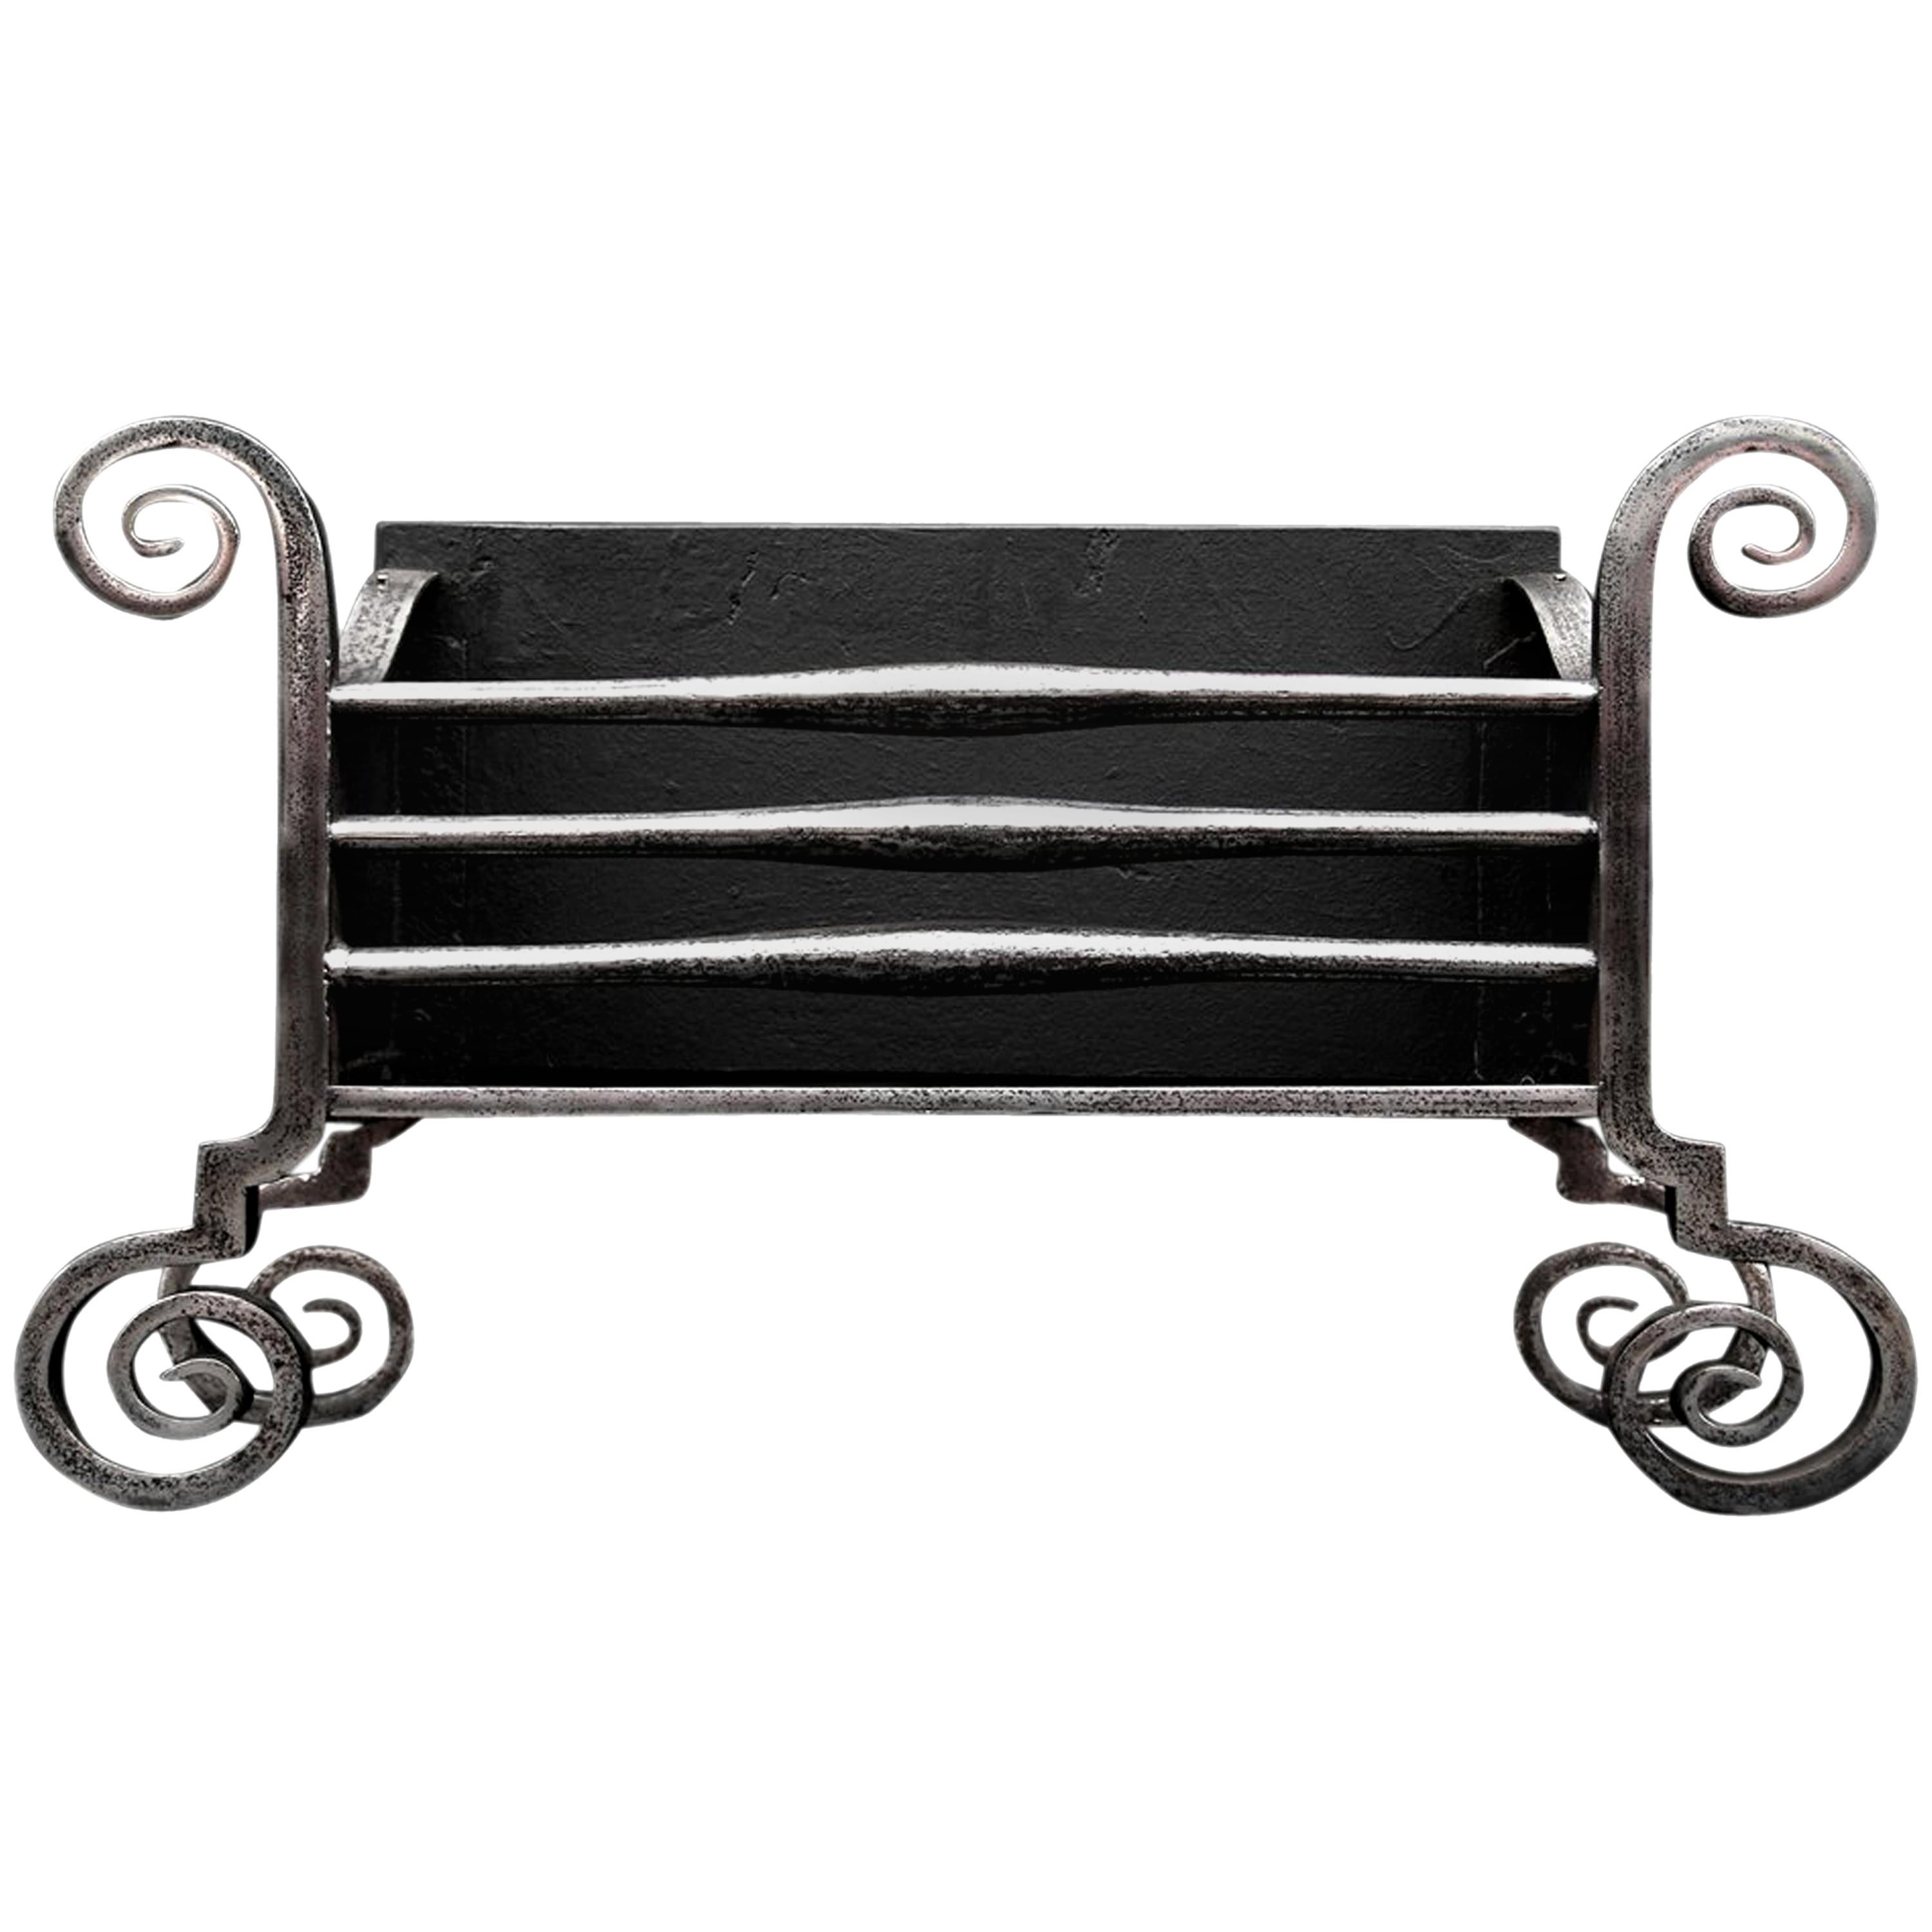 Large Scrolled Wrought Iron Firebasket in the Arts & Crafts Manner